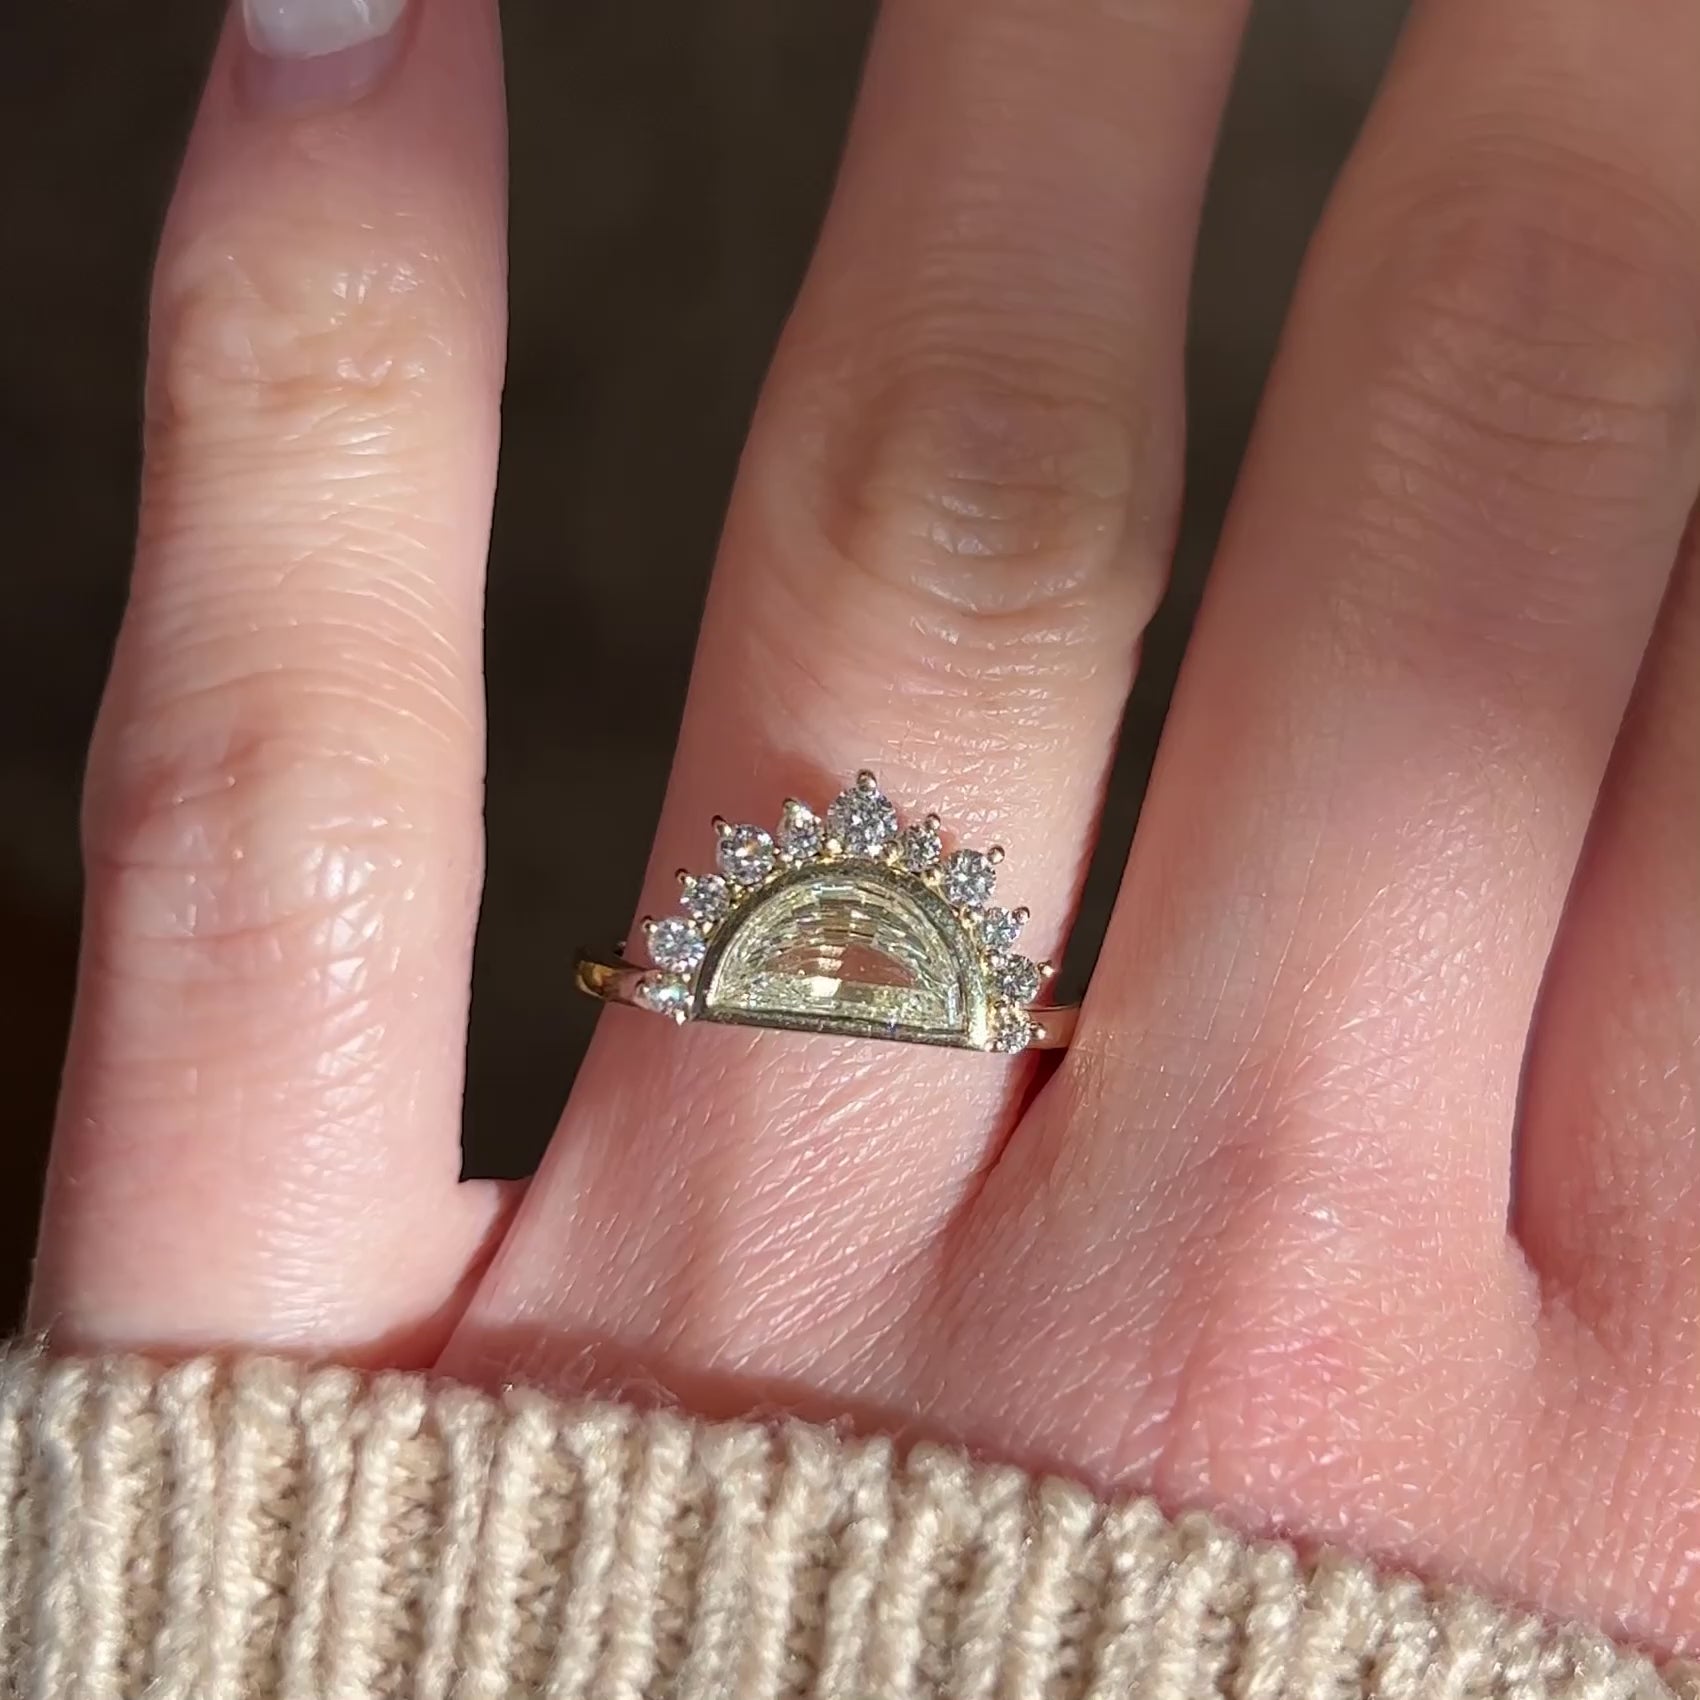 Video of a Half moon diamond engagement ring in a unique 14k yellow gold halo setting on a hand